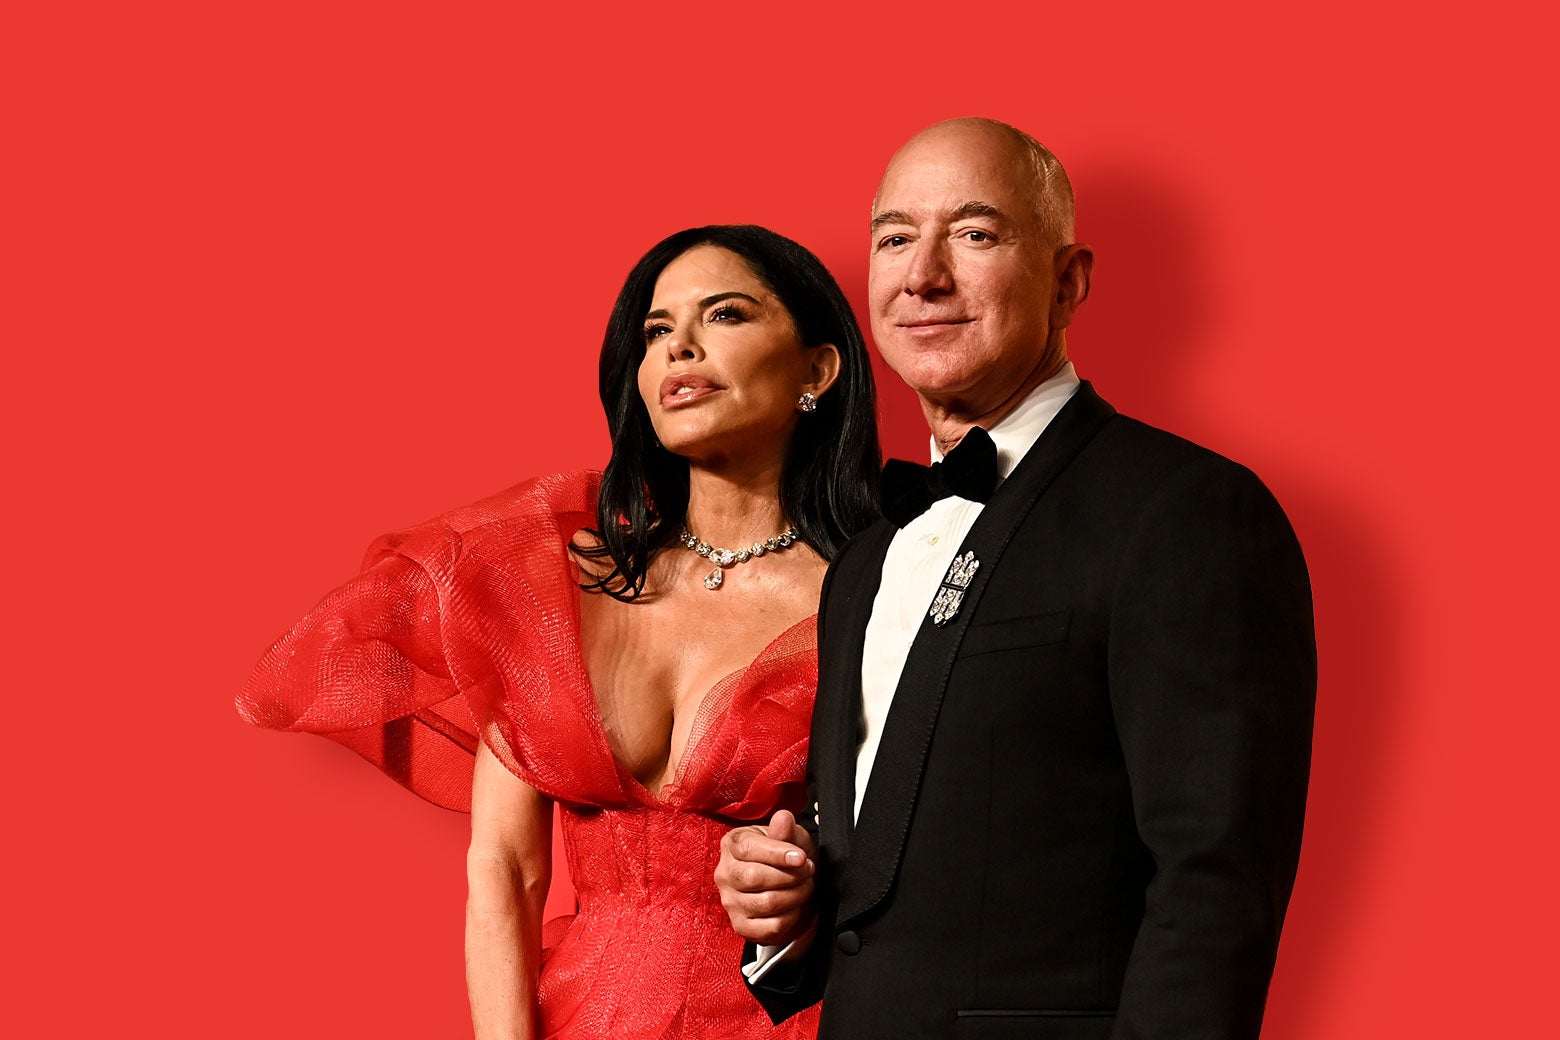 A Famous Troll Went After Jeff Bezos’ Girlfriend This Week. He Should Have.